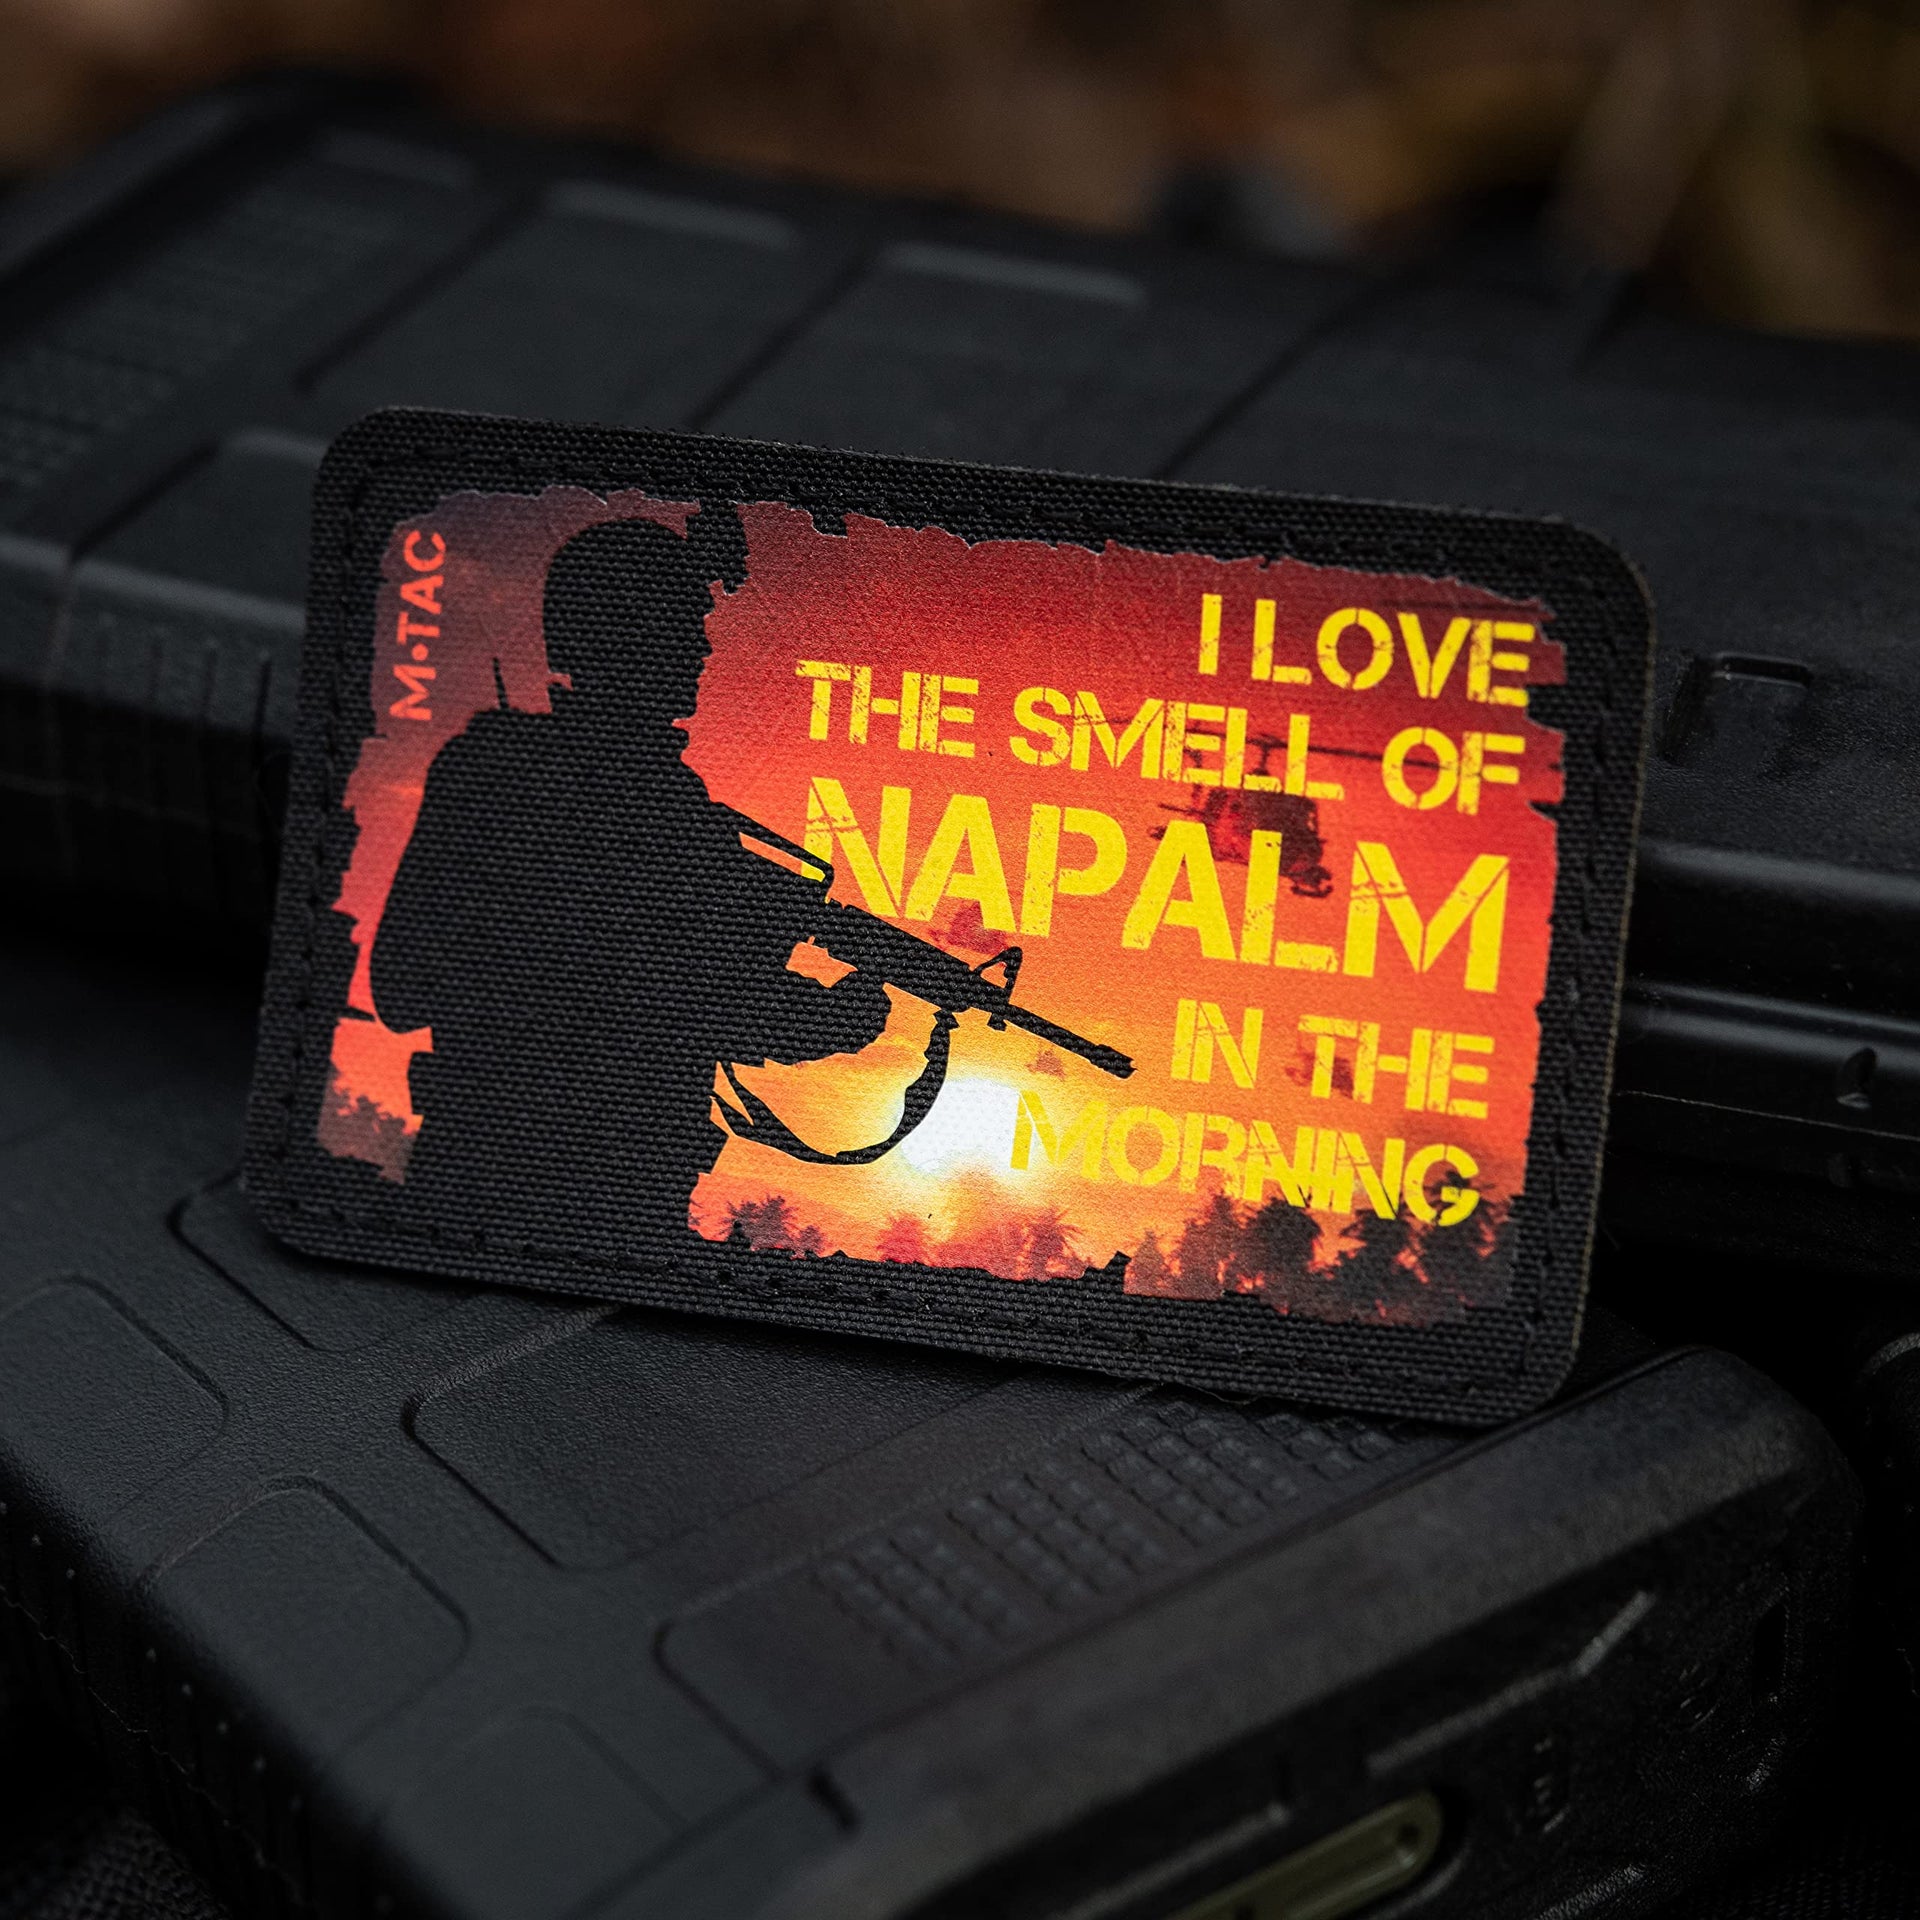 M-Tac patch Smell of Napalm Black